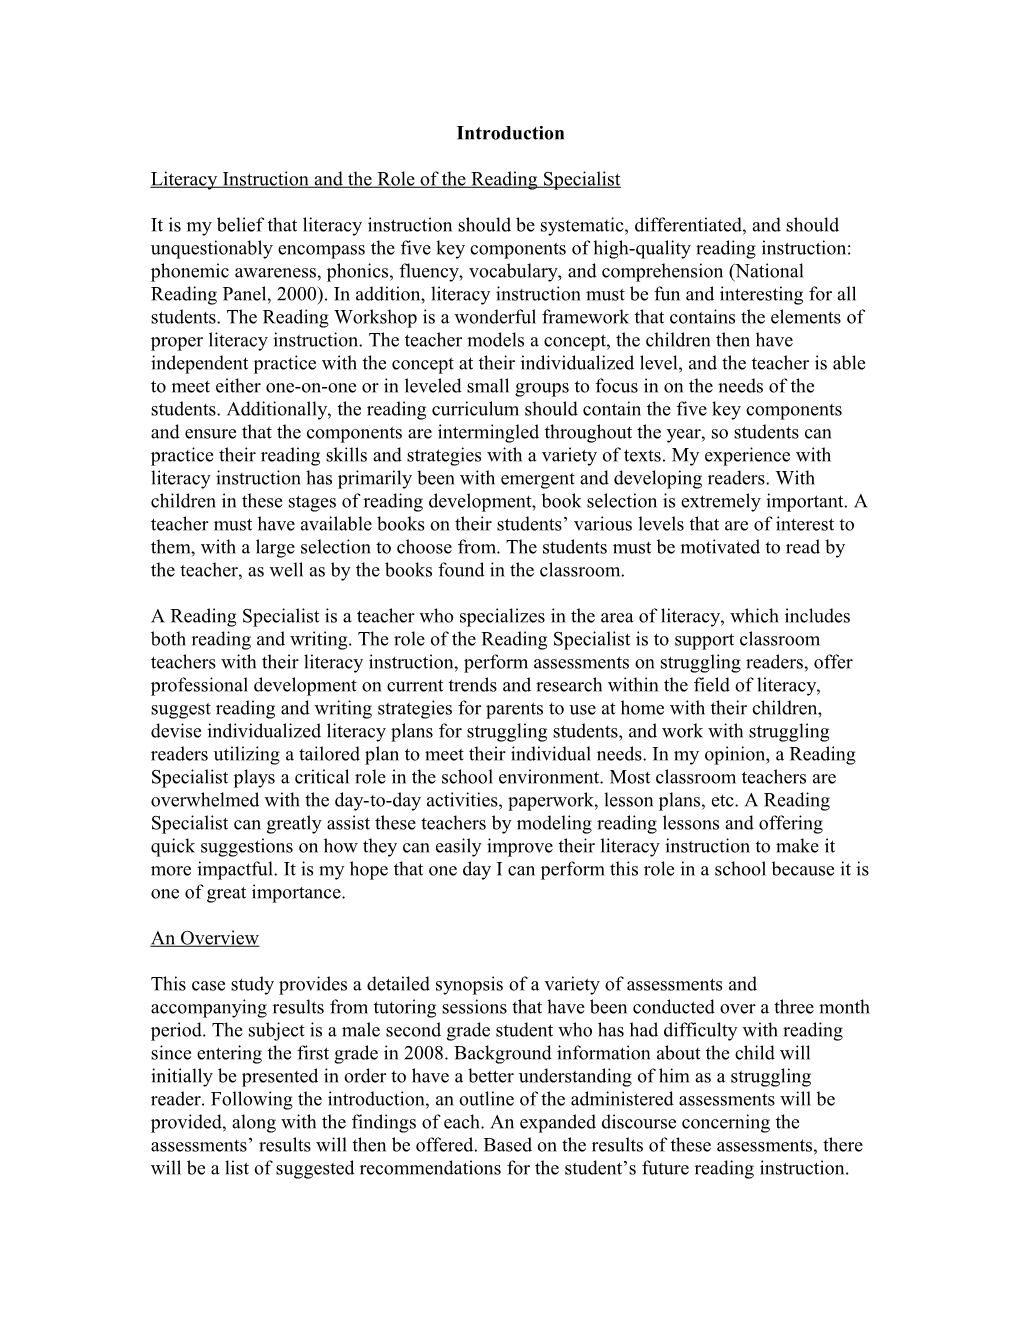 Philosophy of Literacy Instruction and the Role of the Reading Specialist